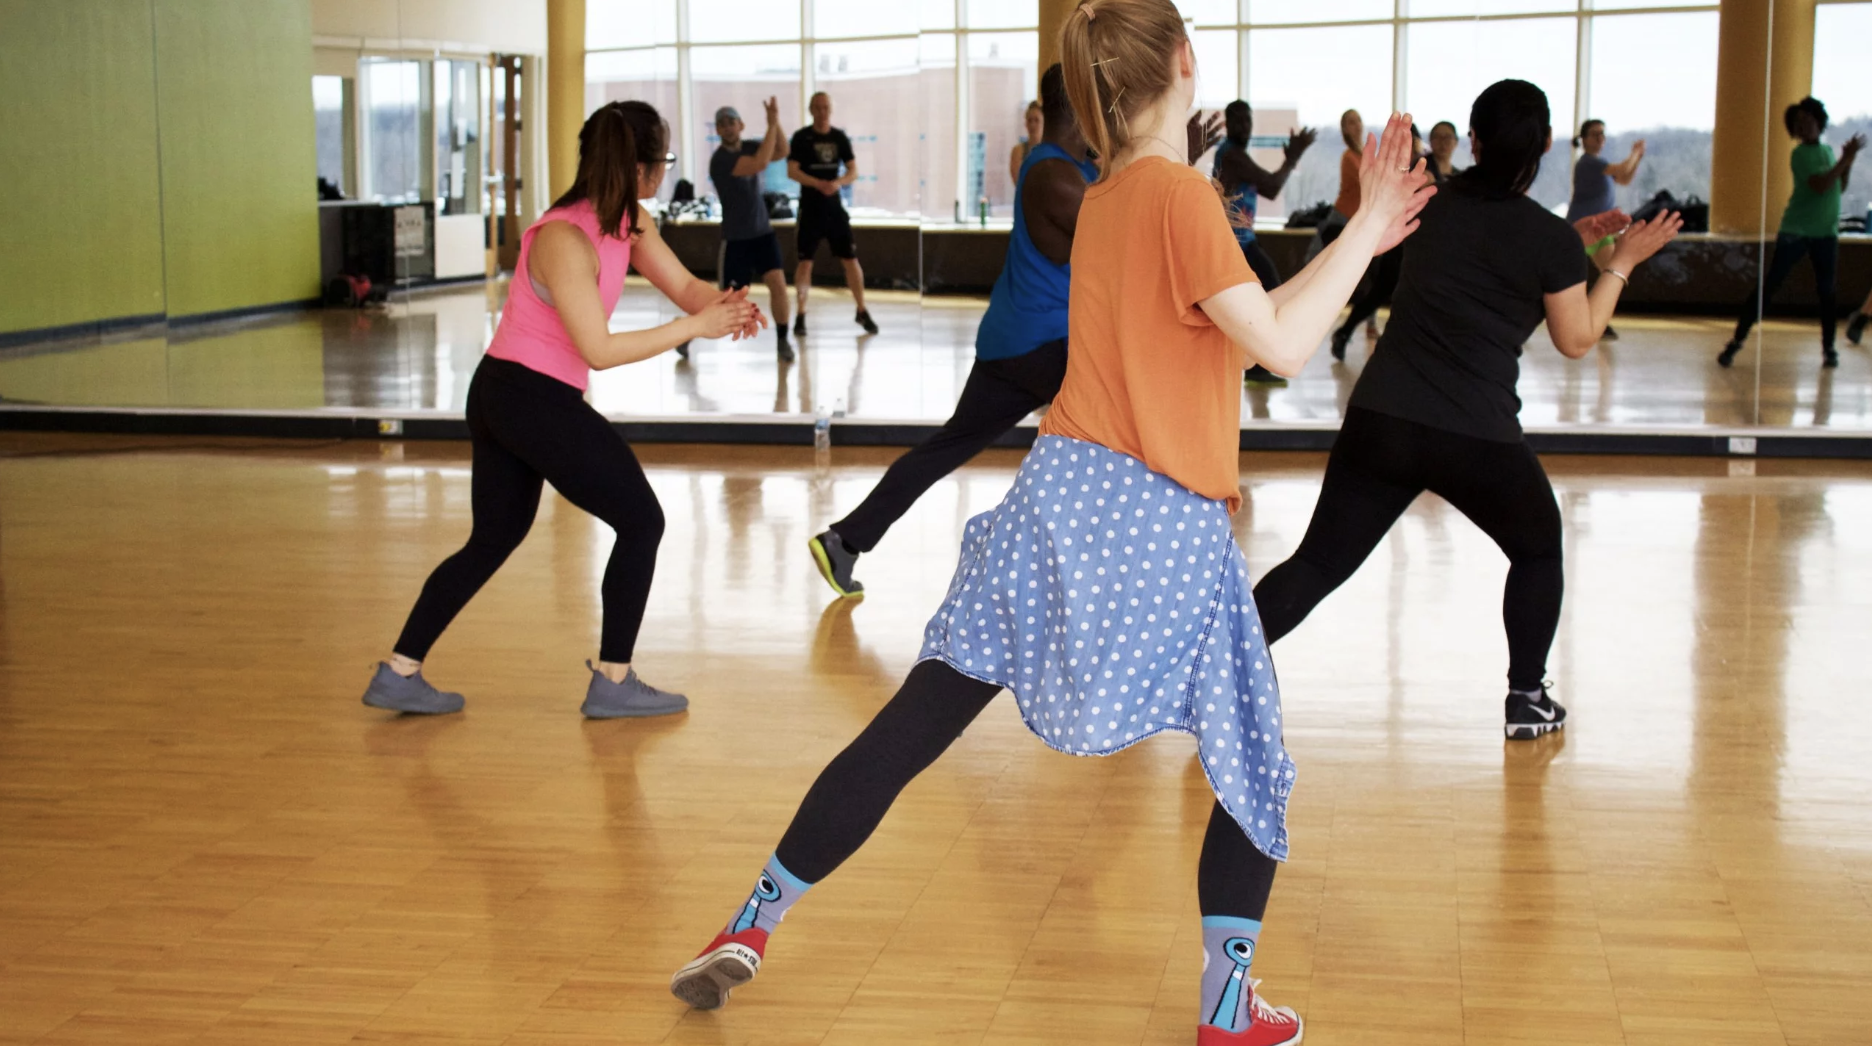 Group of people dance in a dance studio and face a mirror.